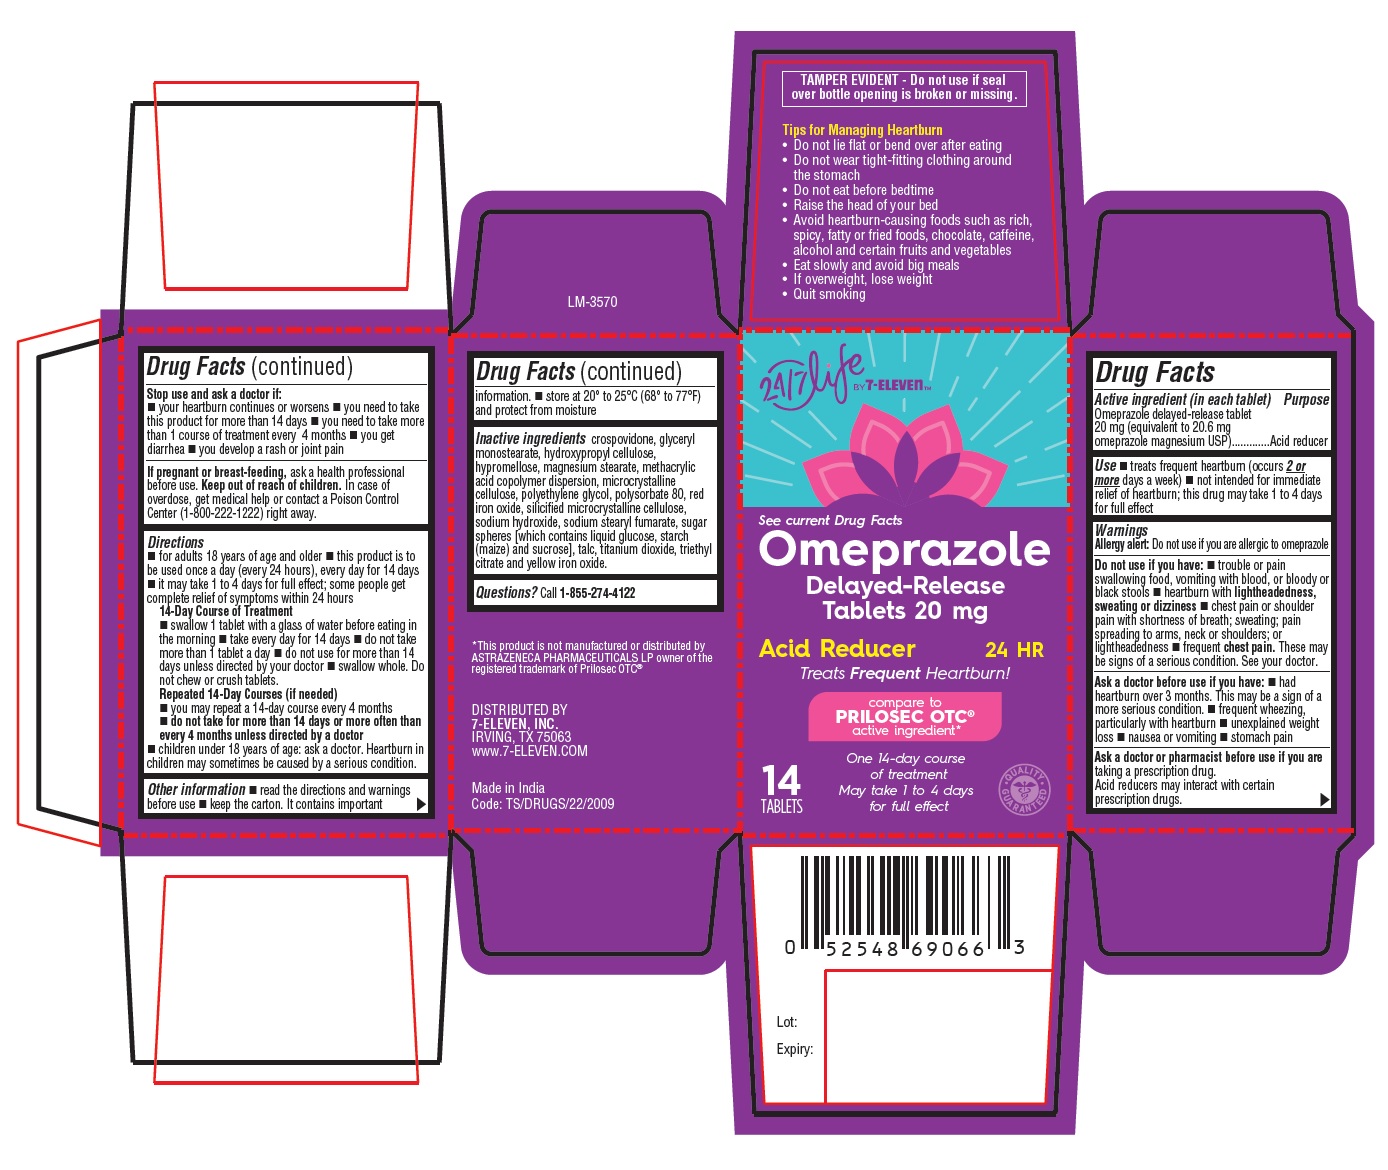 PACKAGE LABEL-PRINCIPAL DISPLAY PANEL - 20 mg Container Carton Label 14(1x14) Tablets